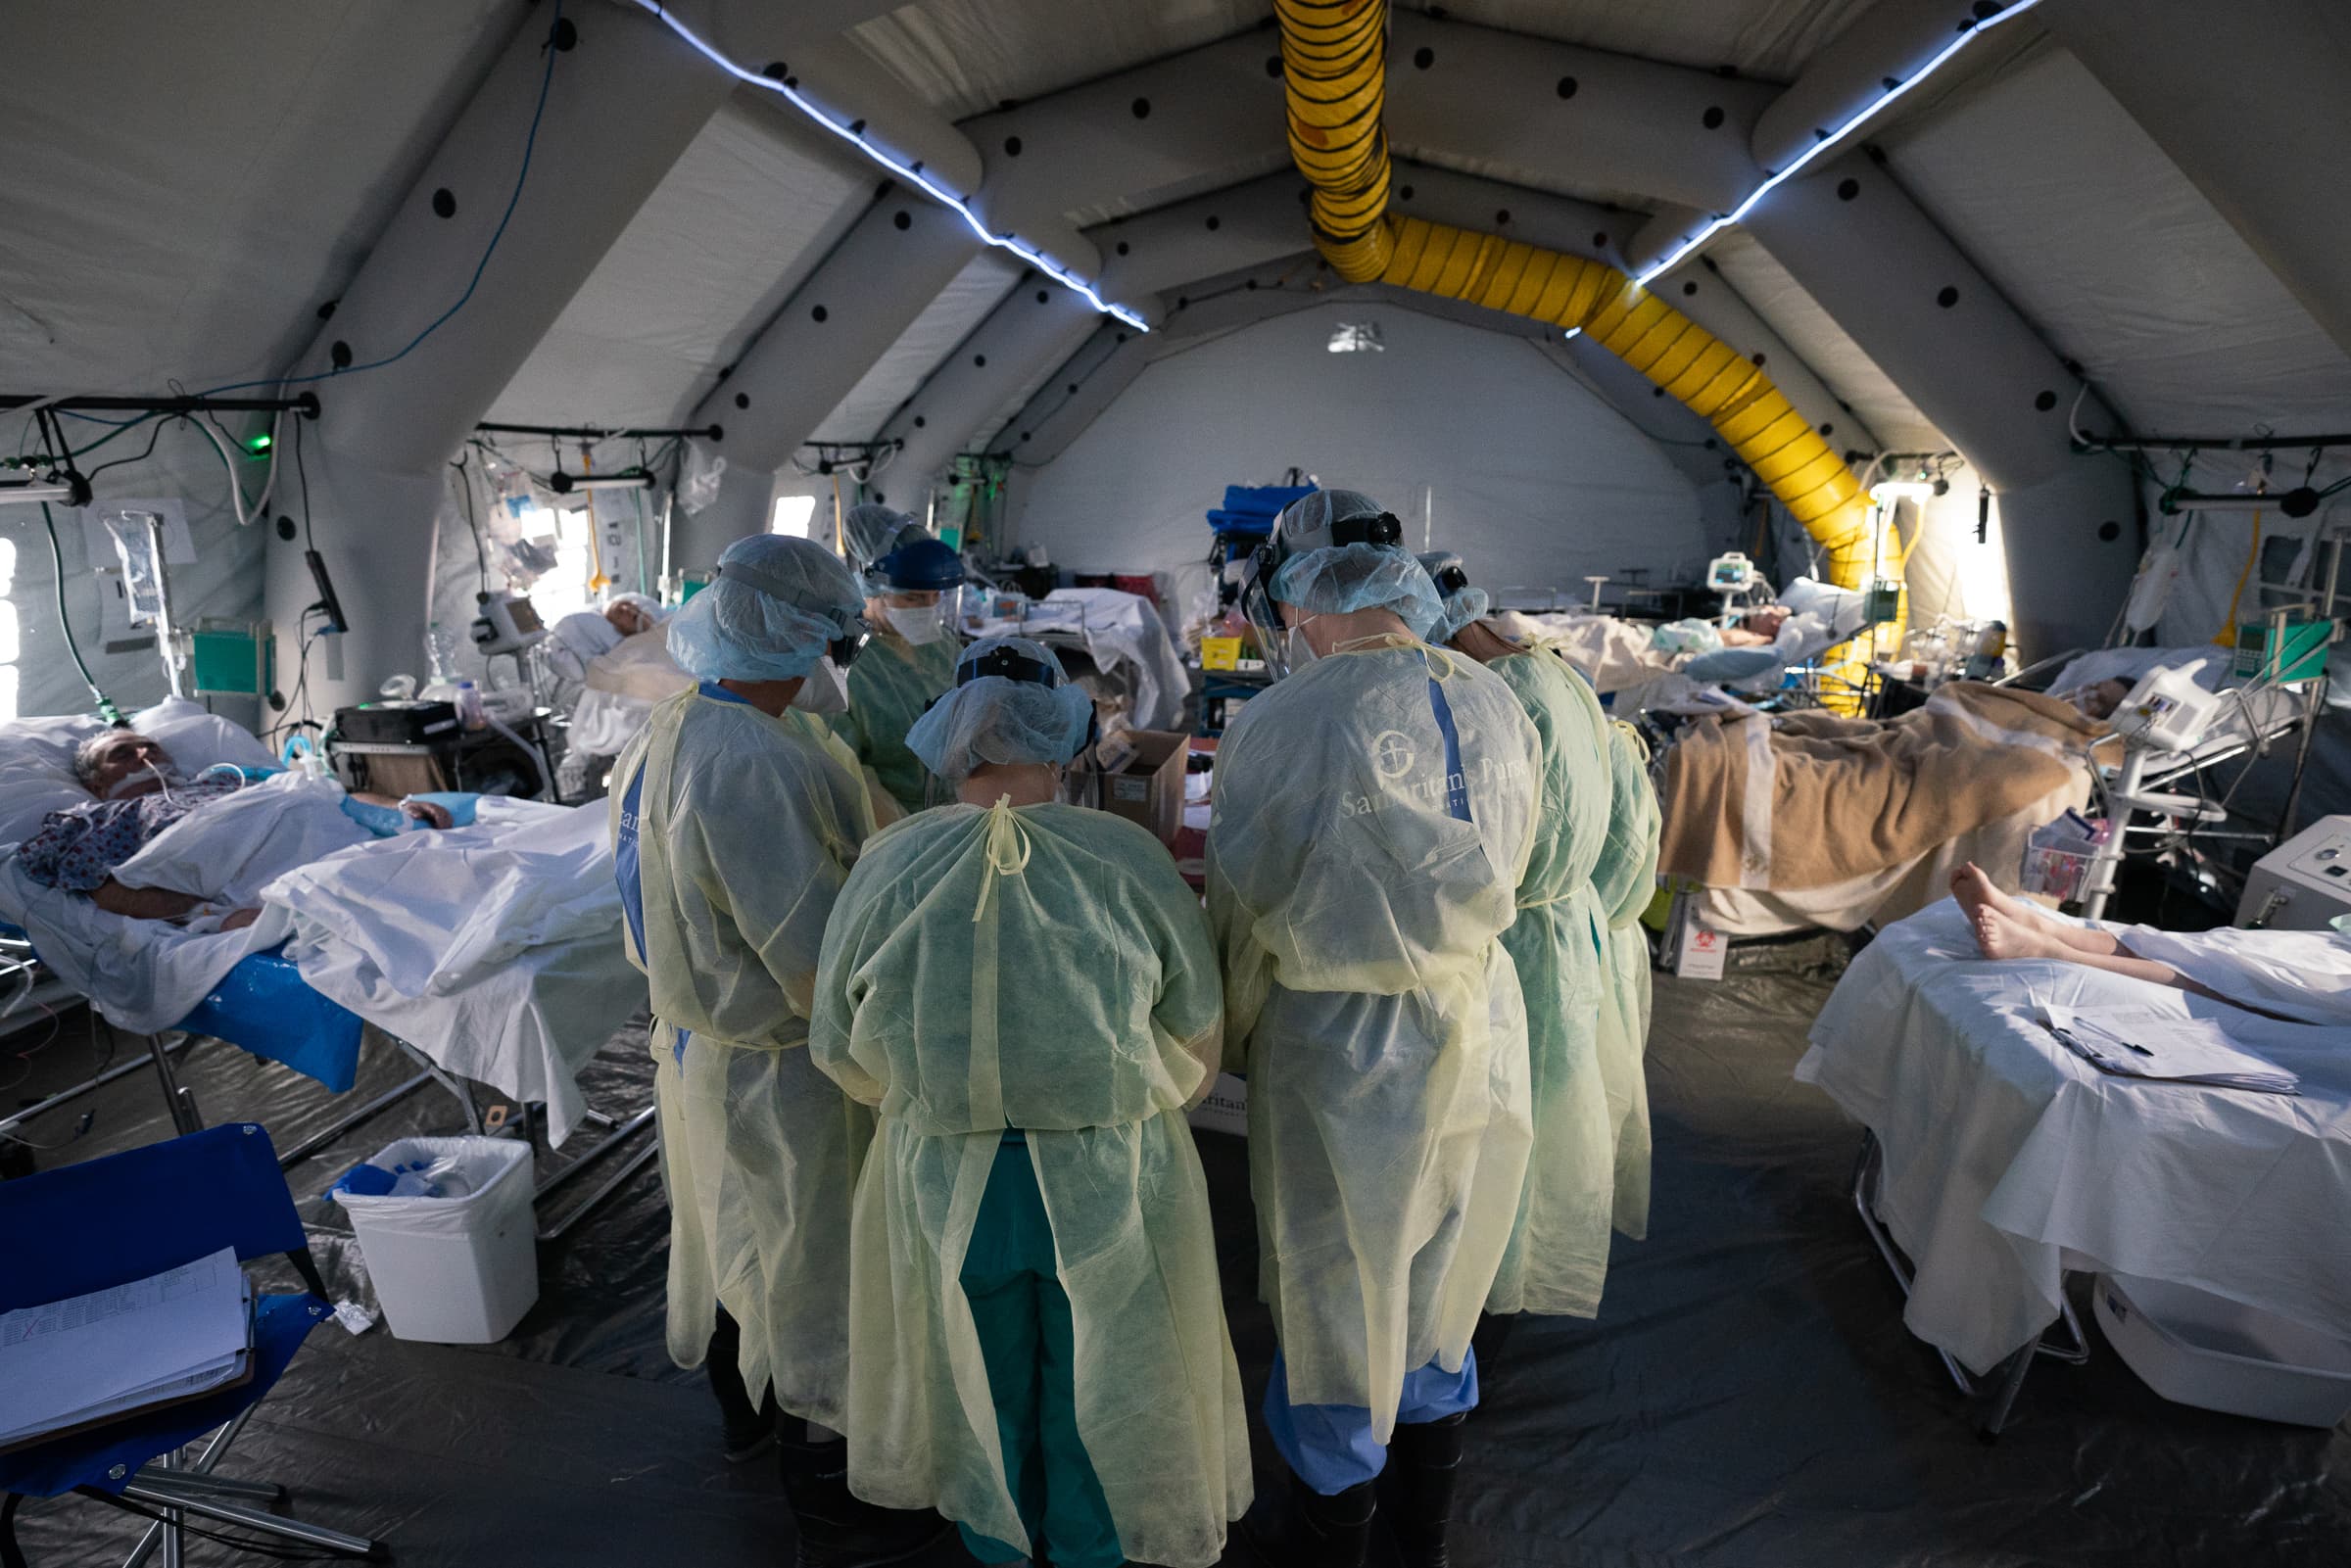 Doctors and nurses take time to pray together for their patients in the field hospital.